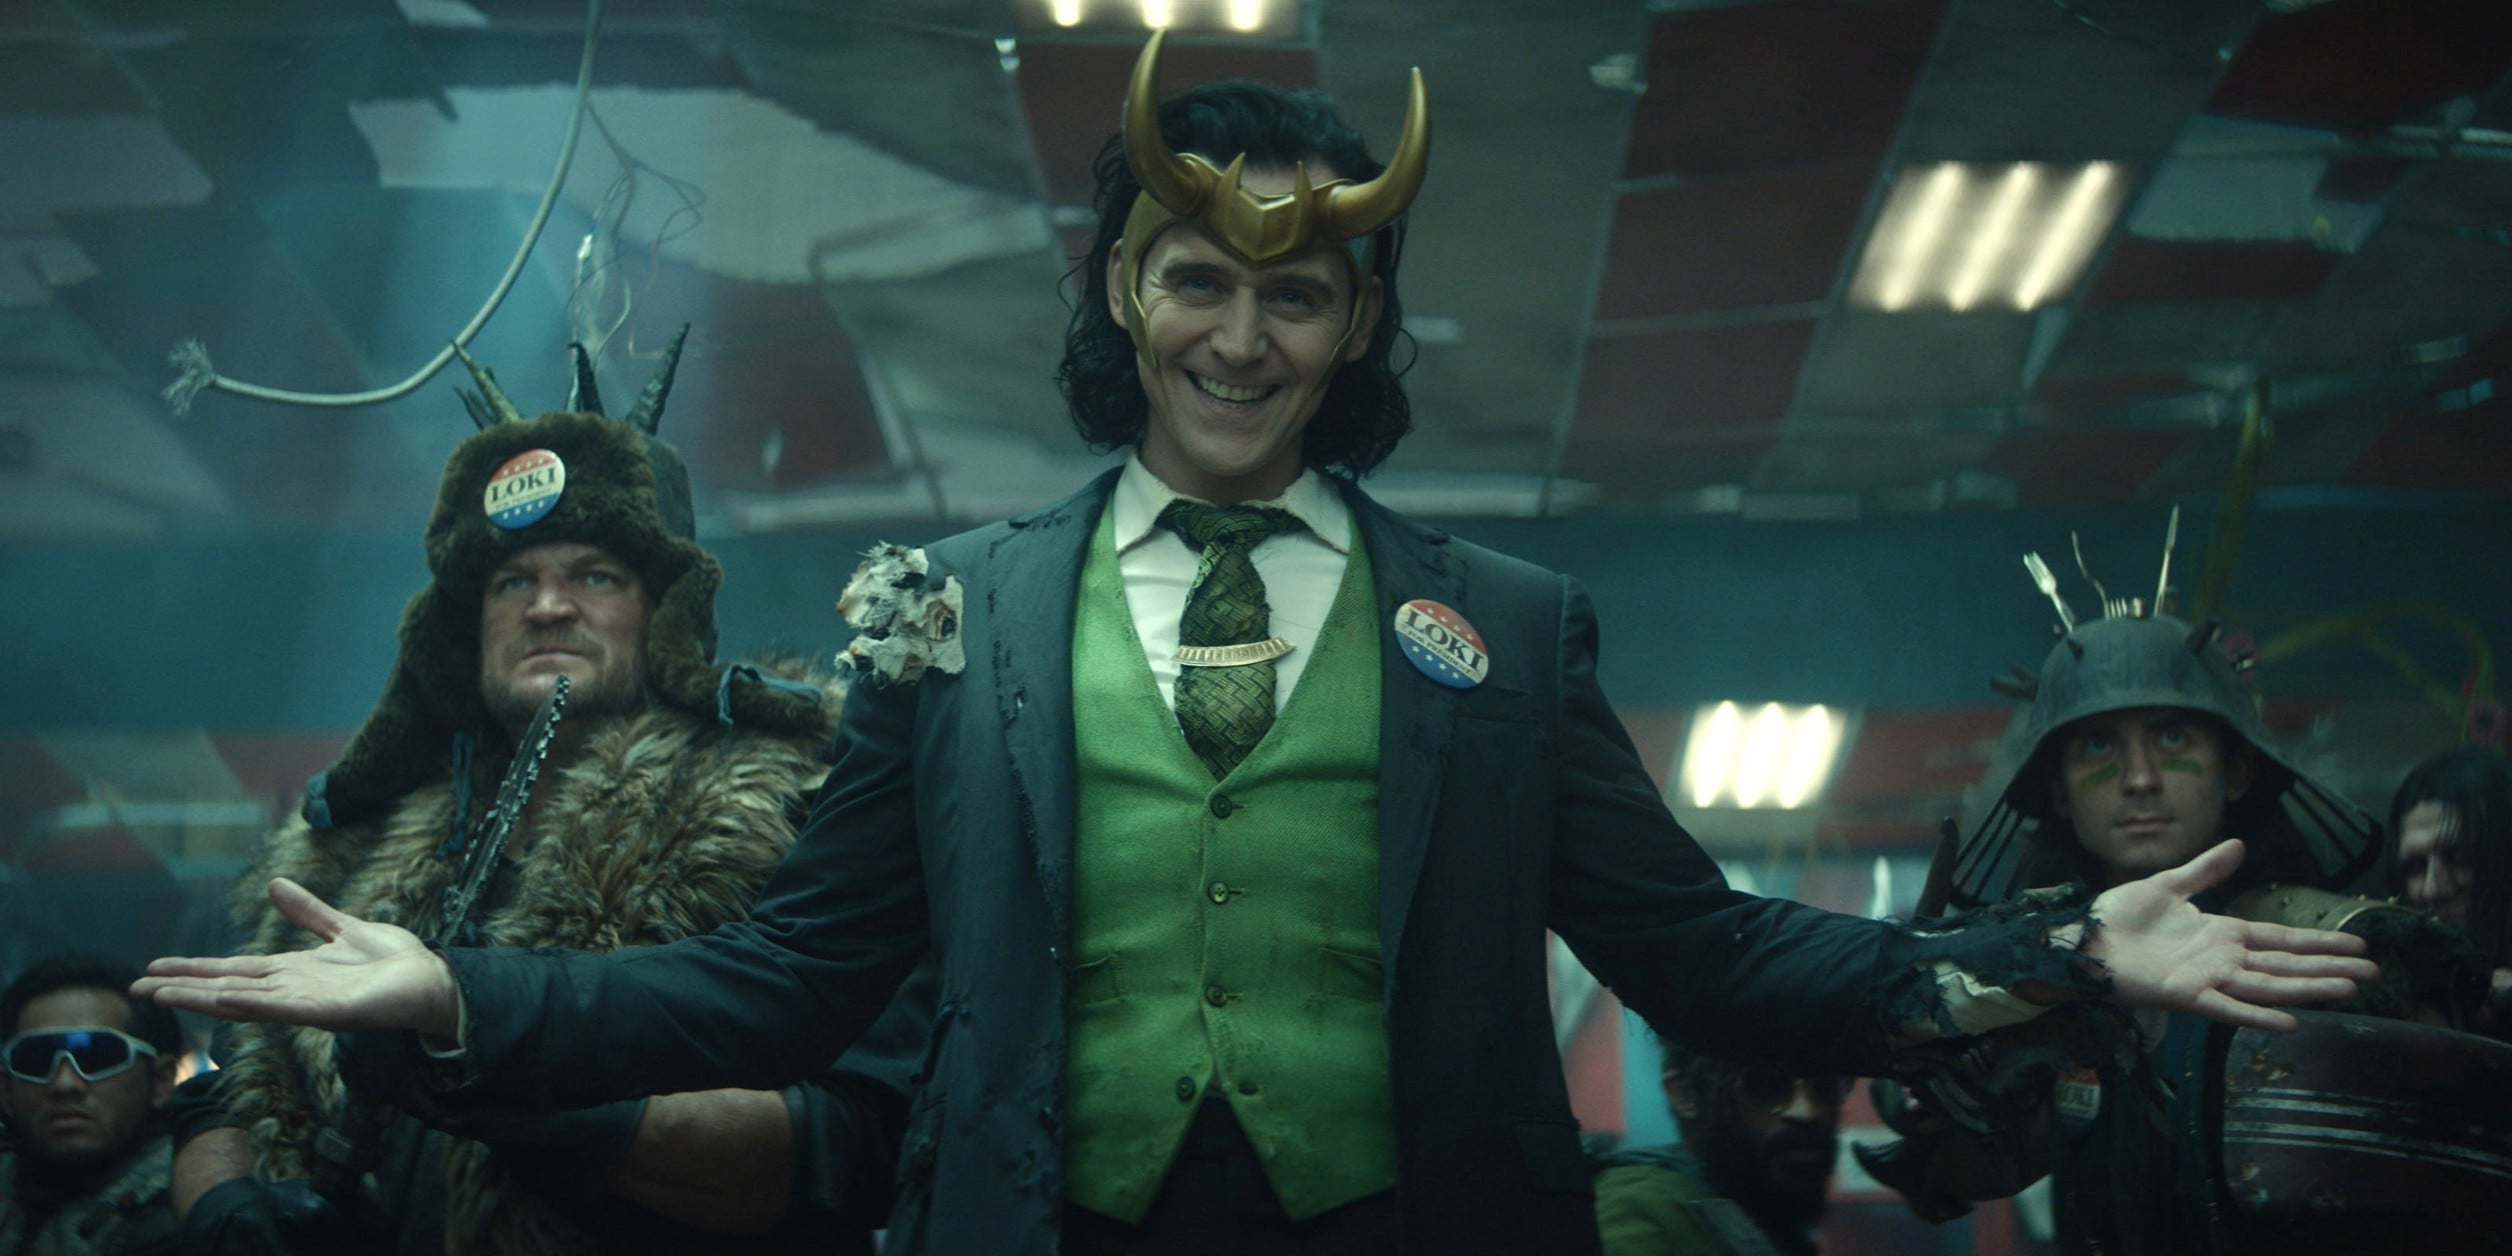 Disney+'s Loki: Who Is Lady Loki? Kang the Conquerer? Time-Keepers